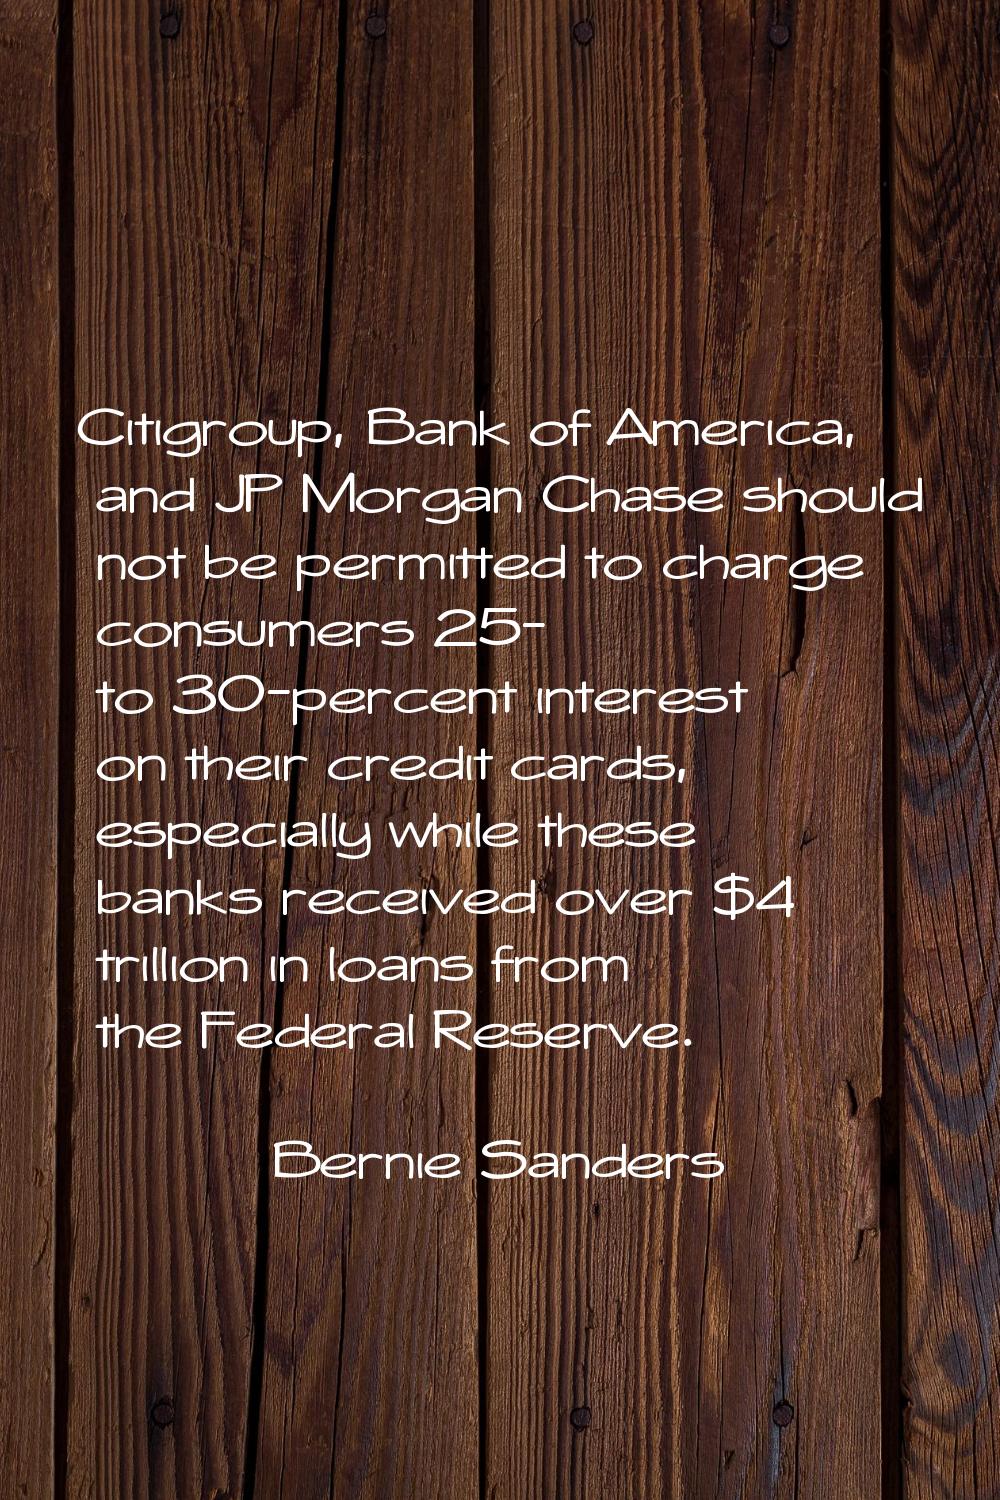 Citigroup, Bank of America, and JP Morgan Chase should not be permitted to charge consumers 25- to 